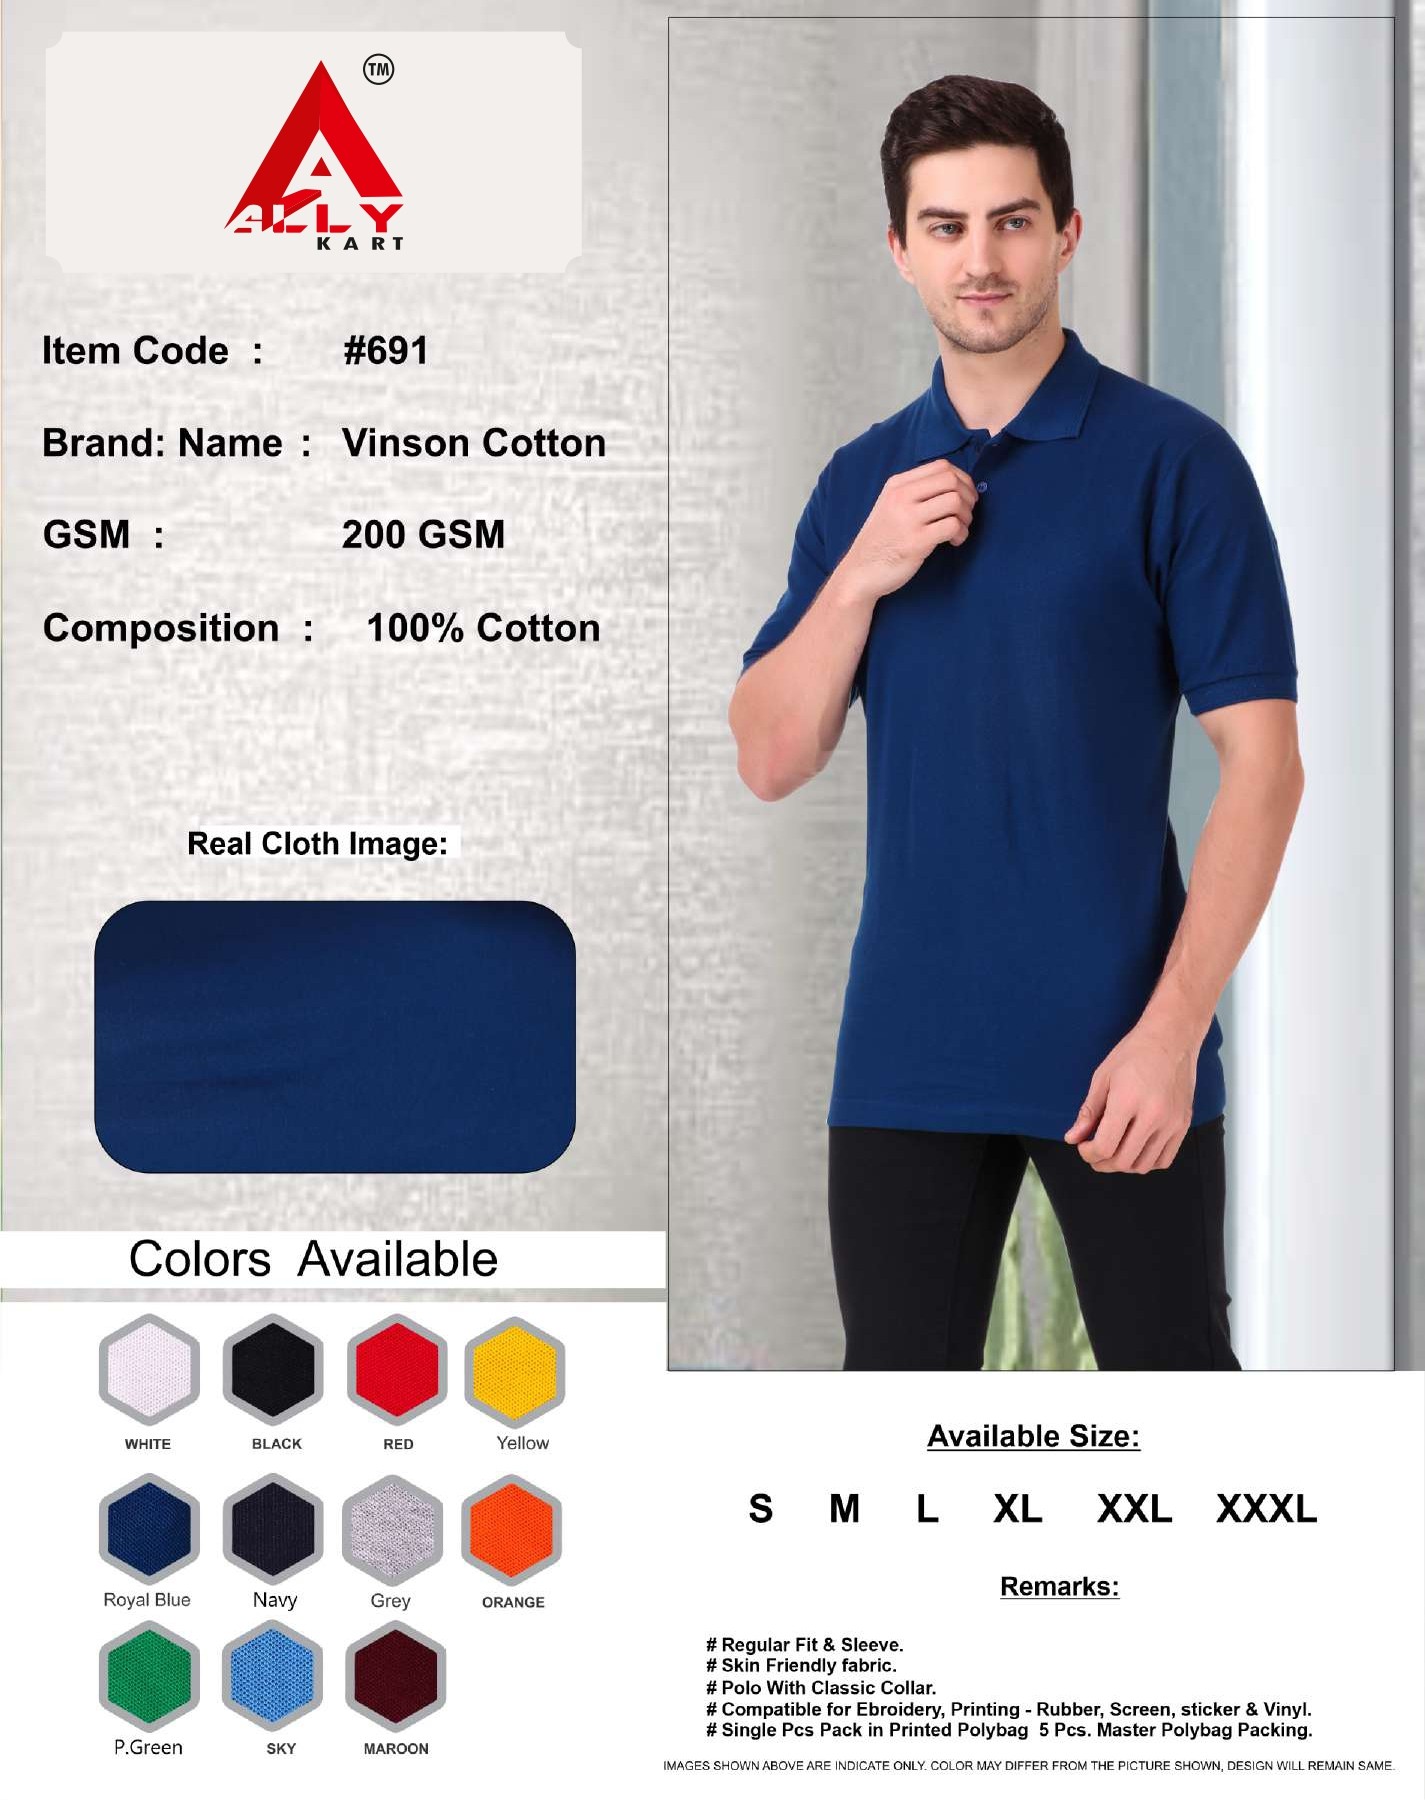 Ally Men's Cotton Rich Solid Polo T-Shirt Regular Fit